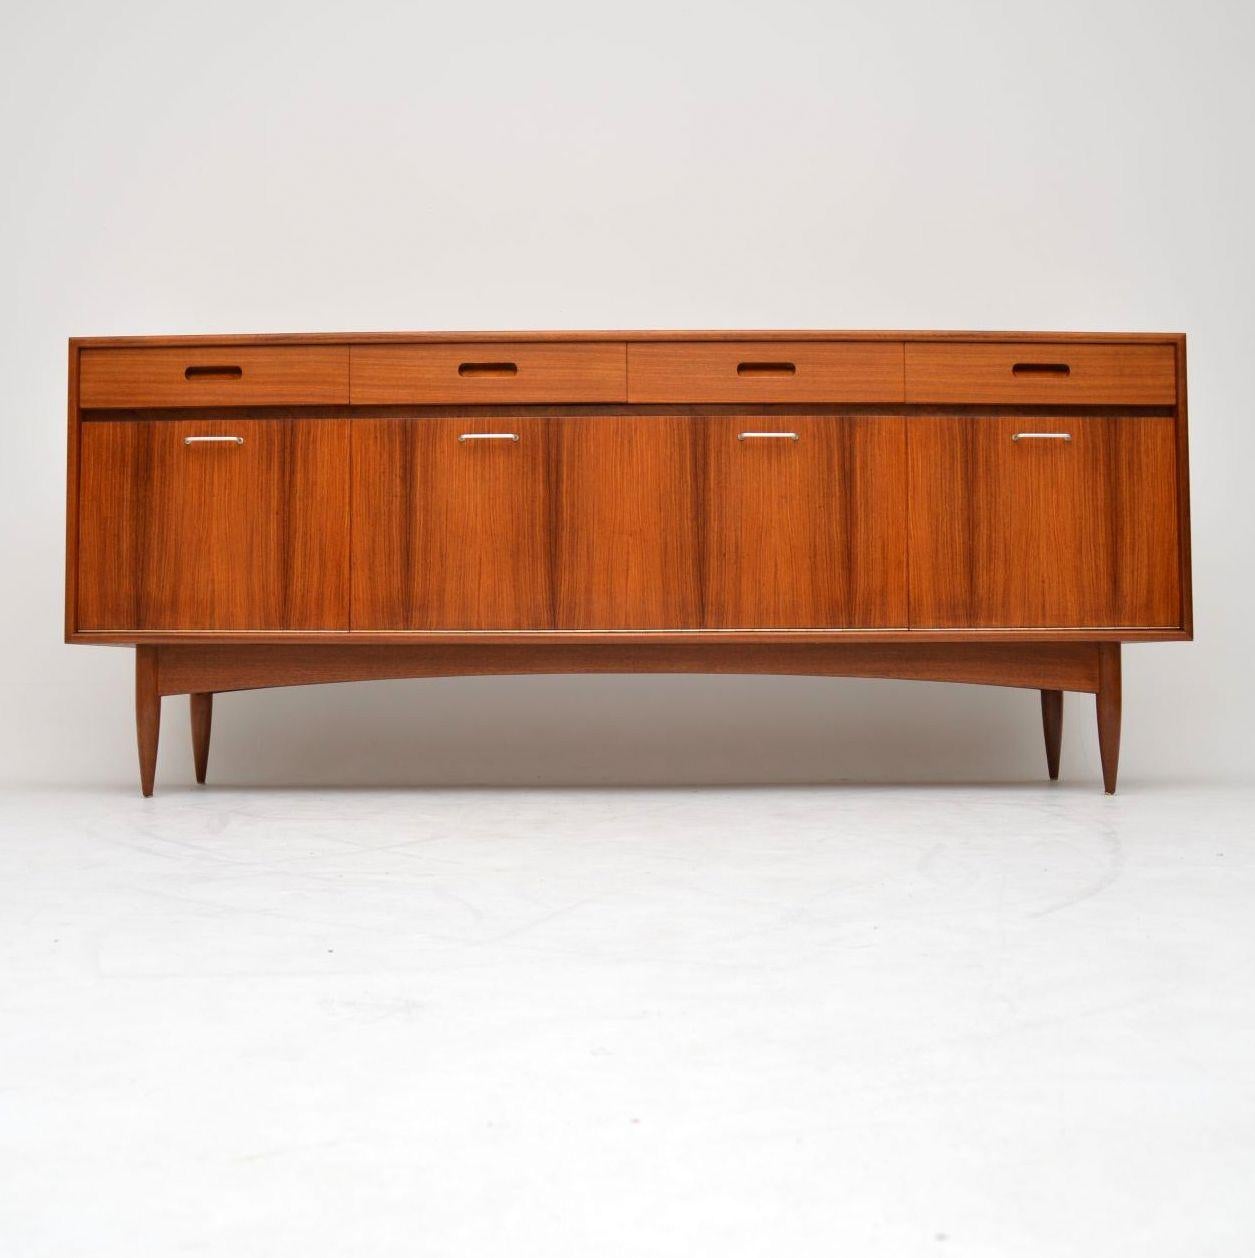 A beautifully styled and extremely well made vintage sideboard from the 1960’s, this has wood doors with a walnut top and sides. It’s of super quality, with unusual brushed steel handles, it’s also nicely finished on the back, so can be used as a